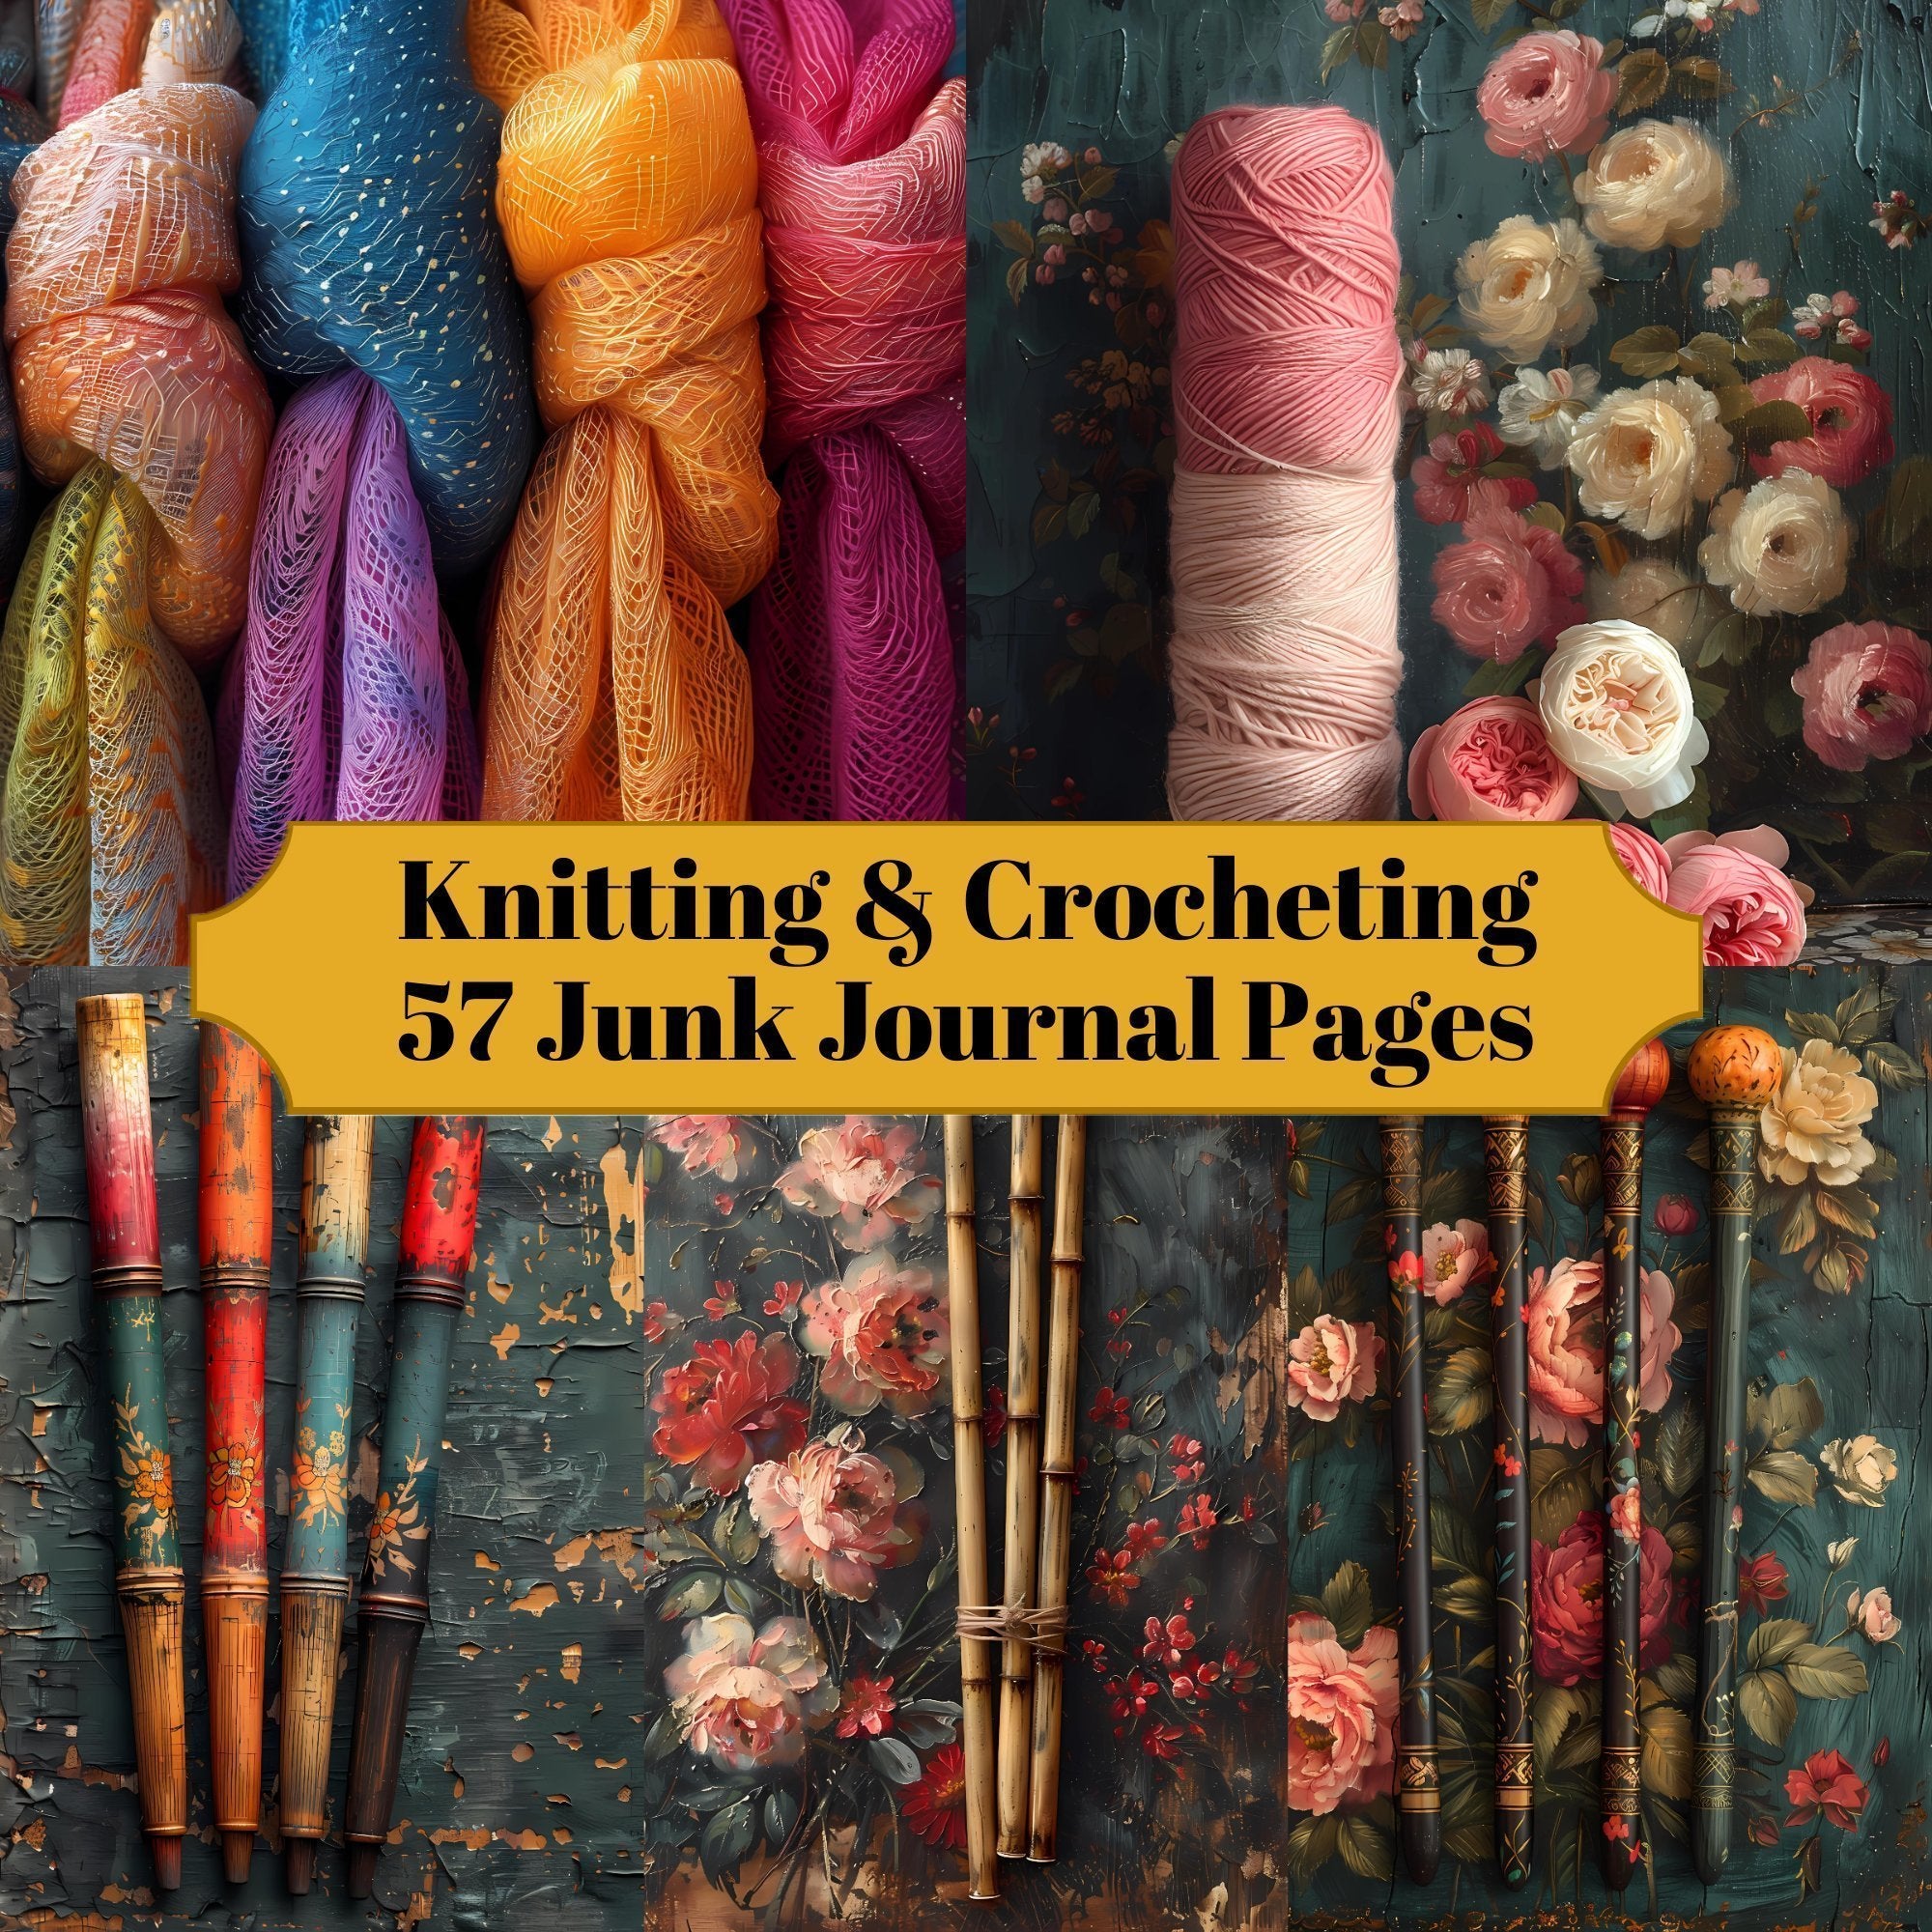 Knitting & Crocheting Junk Journal Pages